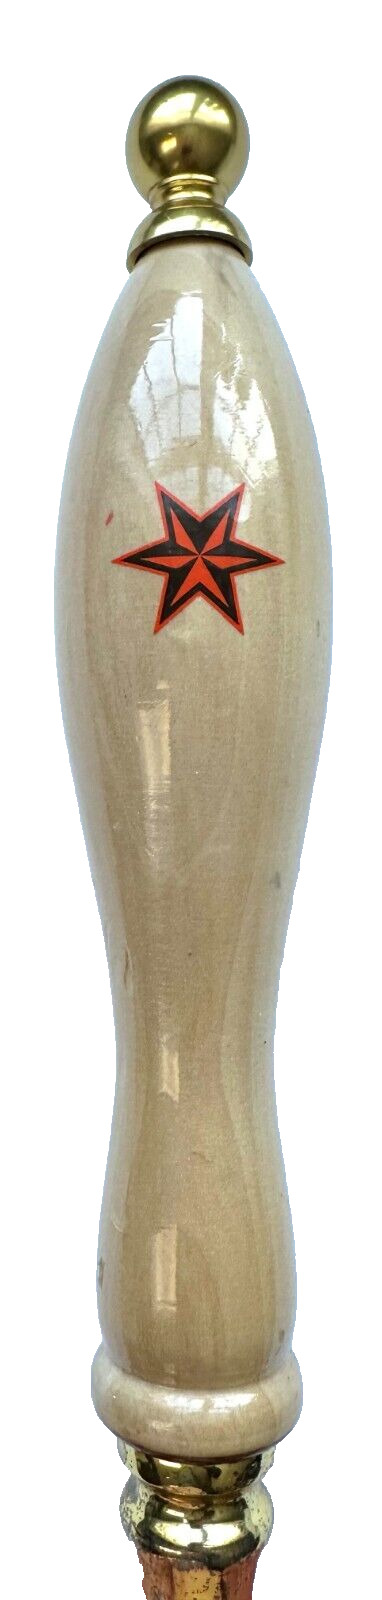 SIXPOINT BREWERY - BROOKLYN, NY - BEER TAP HANDLE- MANCAVE UNIVERSAL